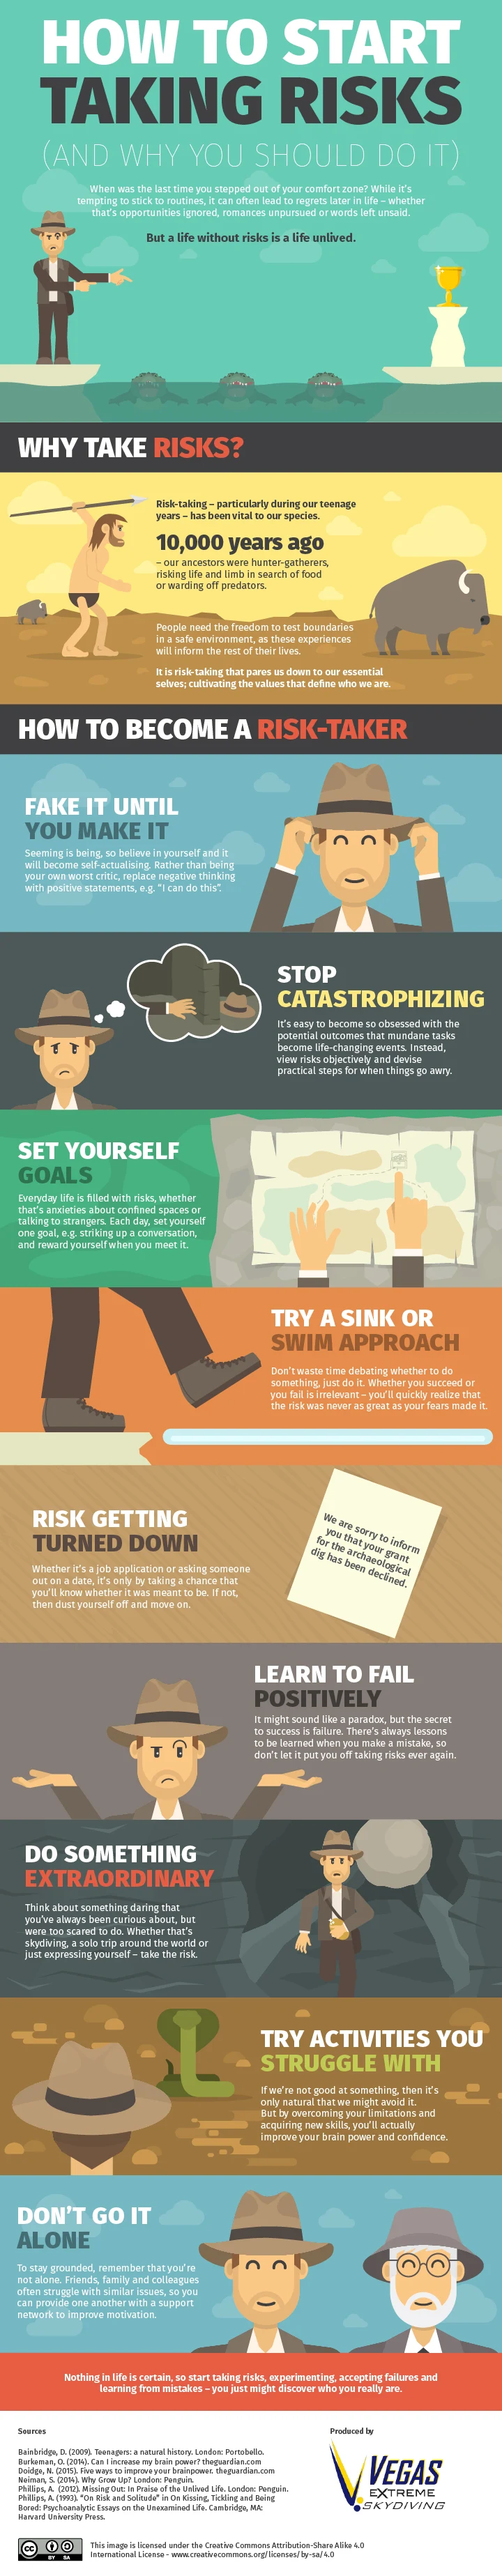 #infographic: Overcoming the Fear of Taking a Risk: Just Do It